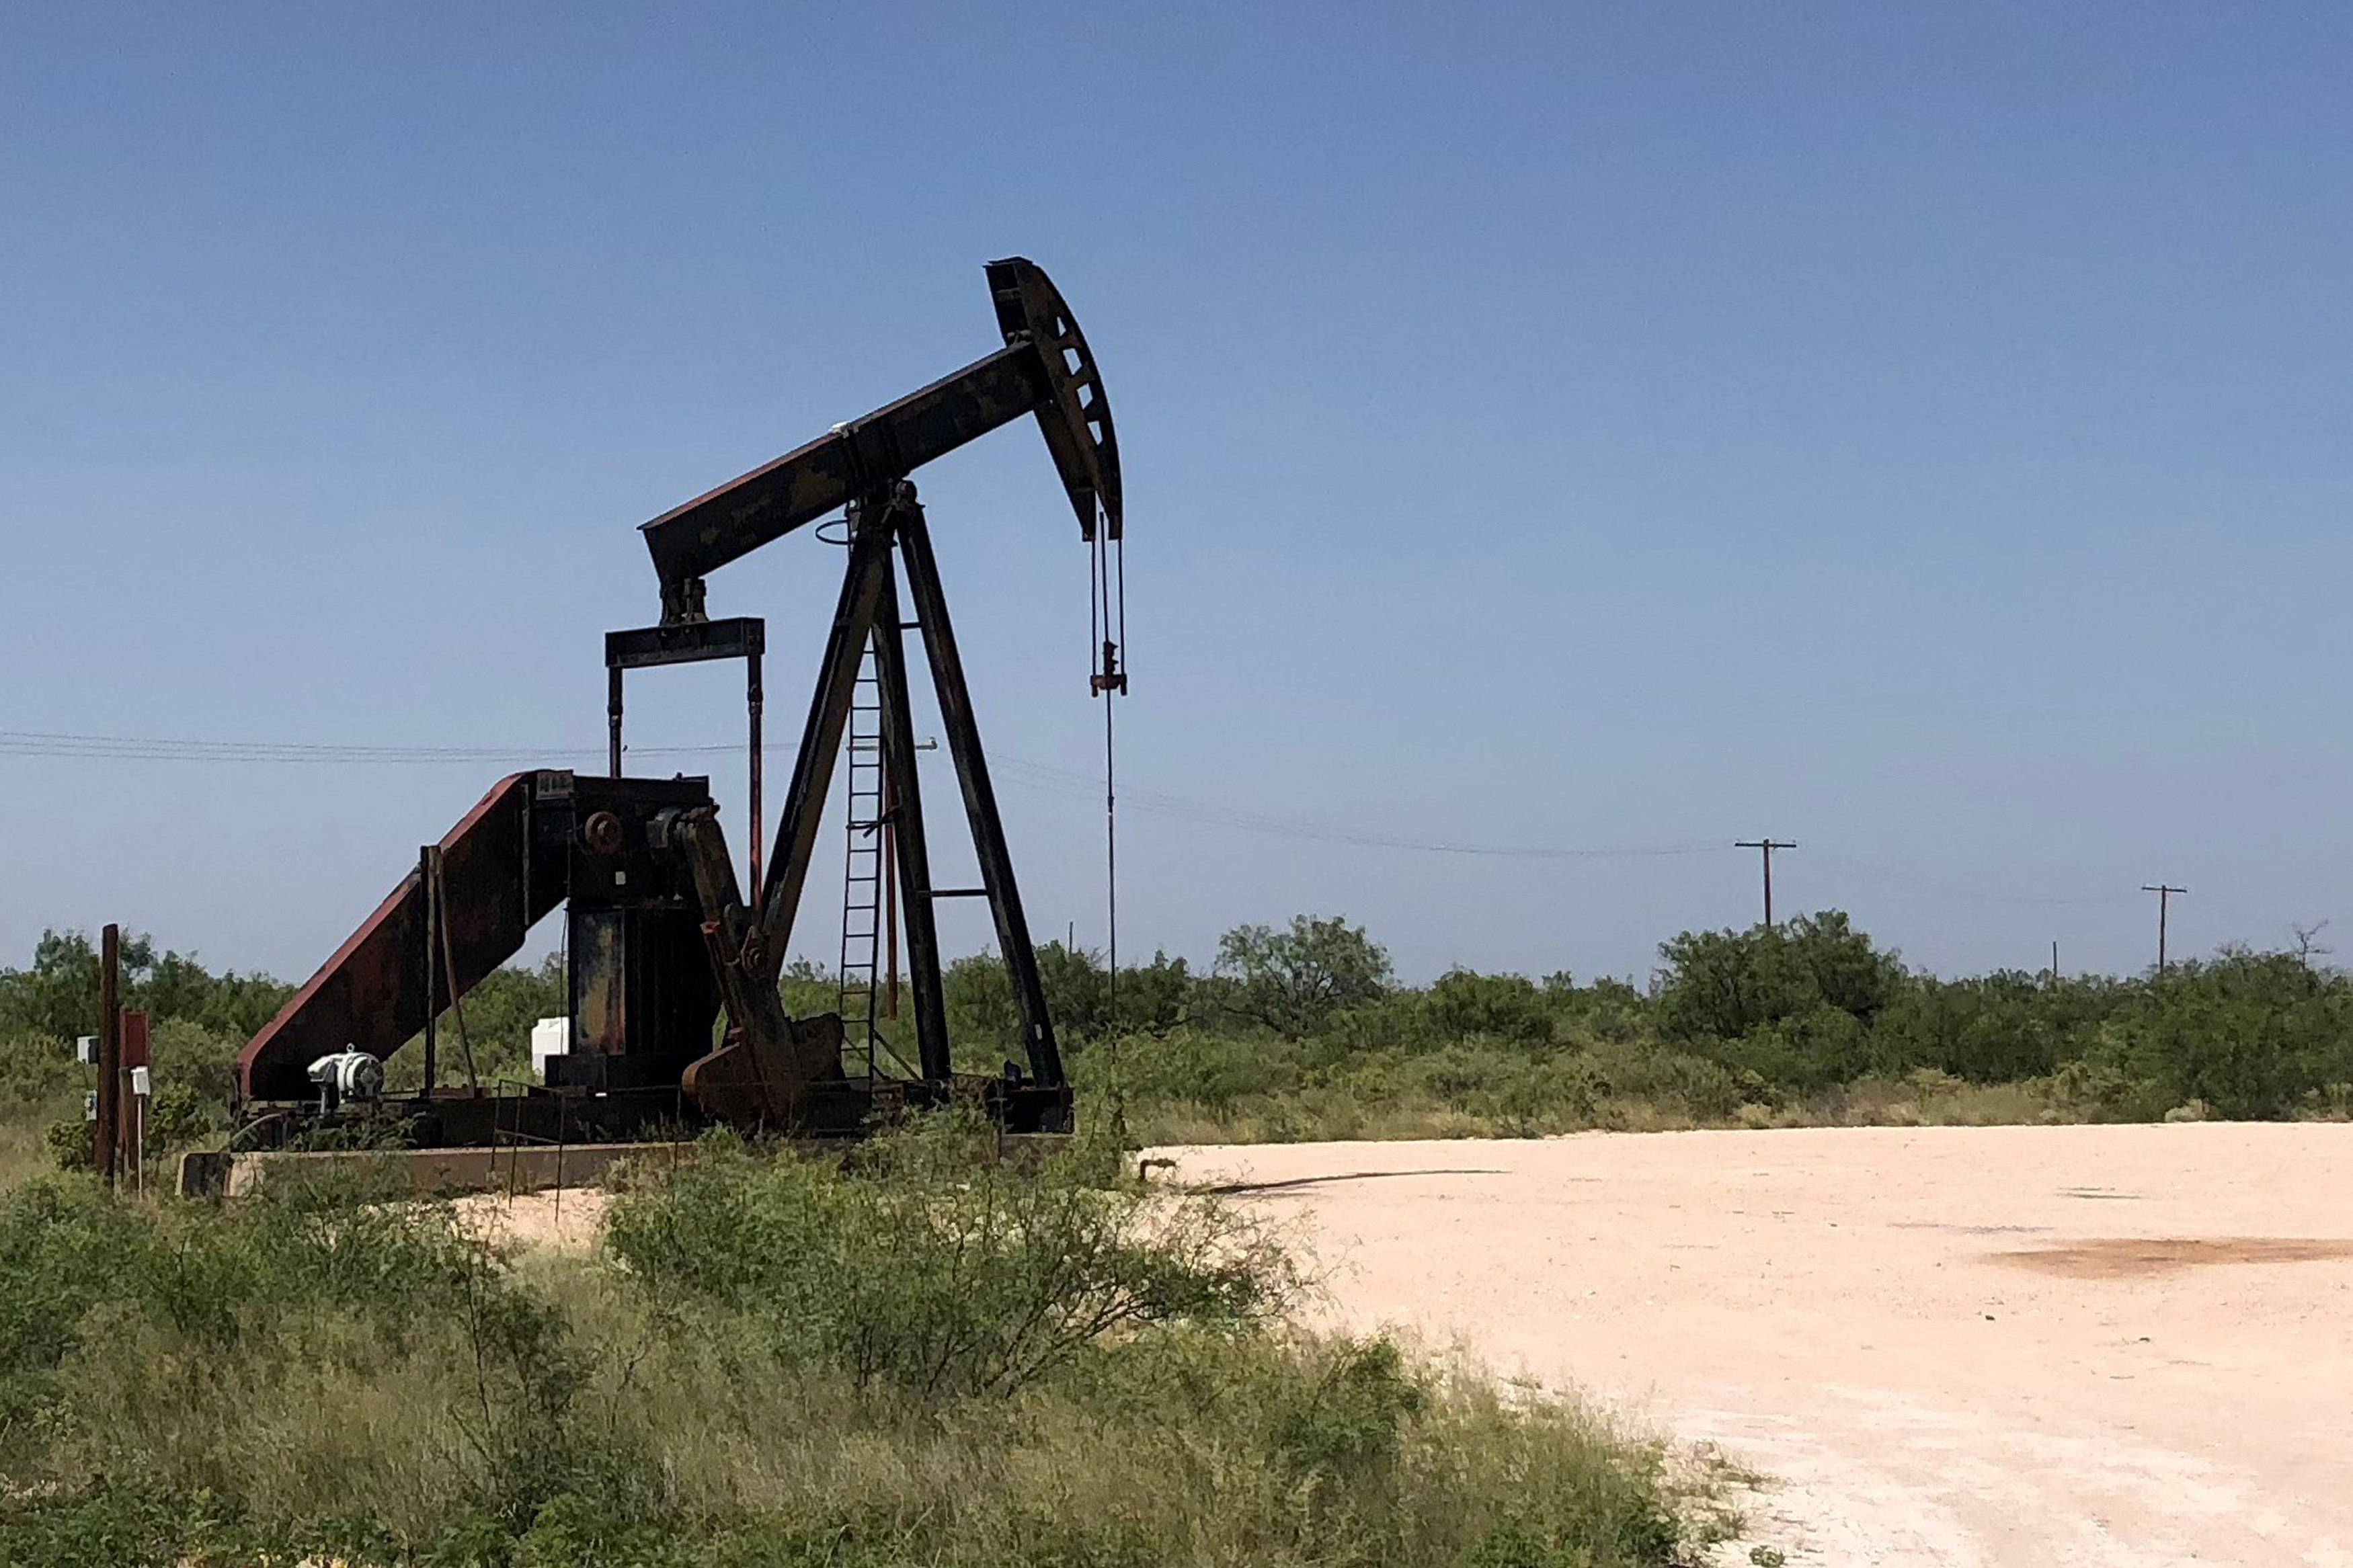 A pumpjack is shown outside Midland-Odessa area in the Permian basin in Texas